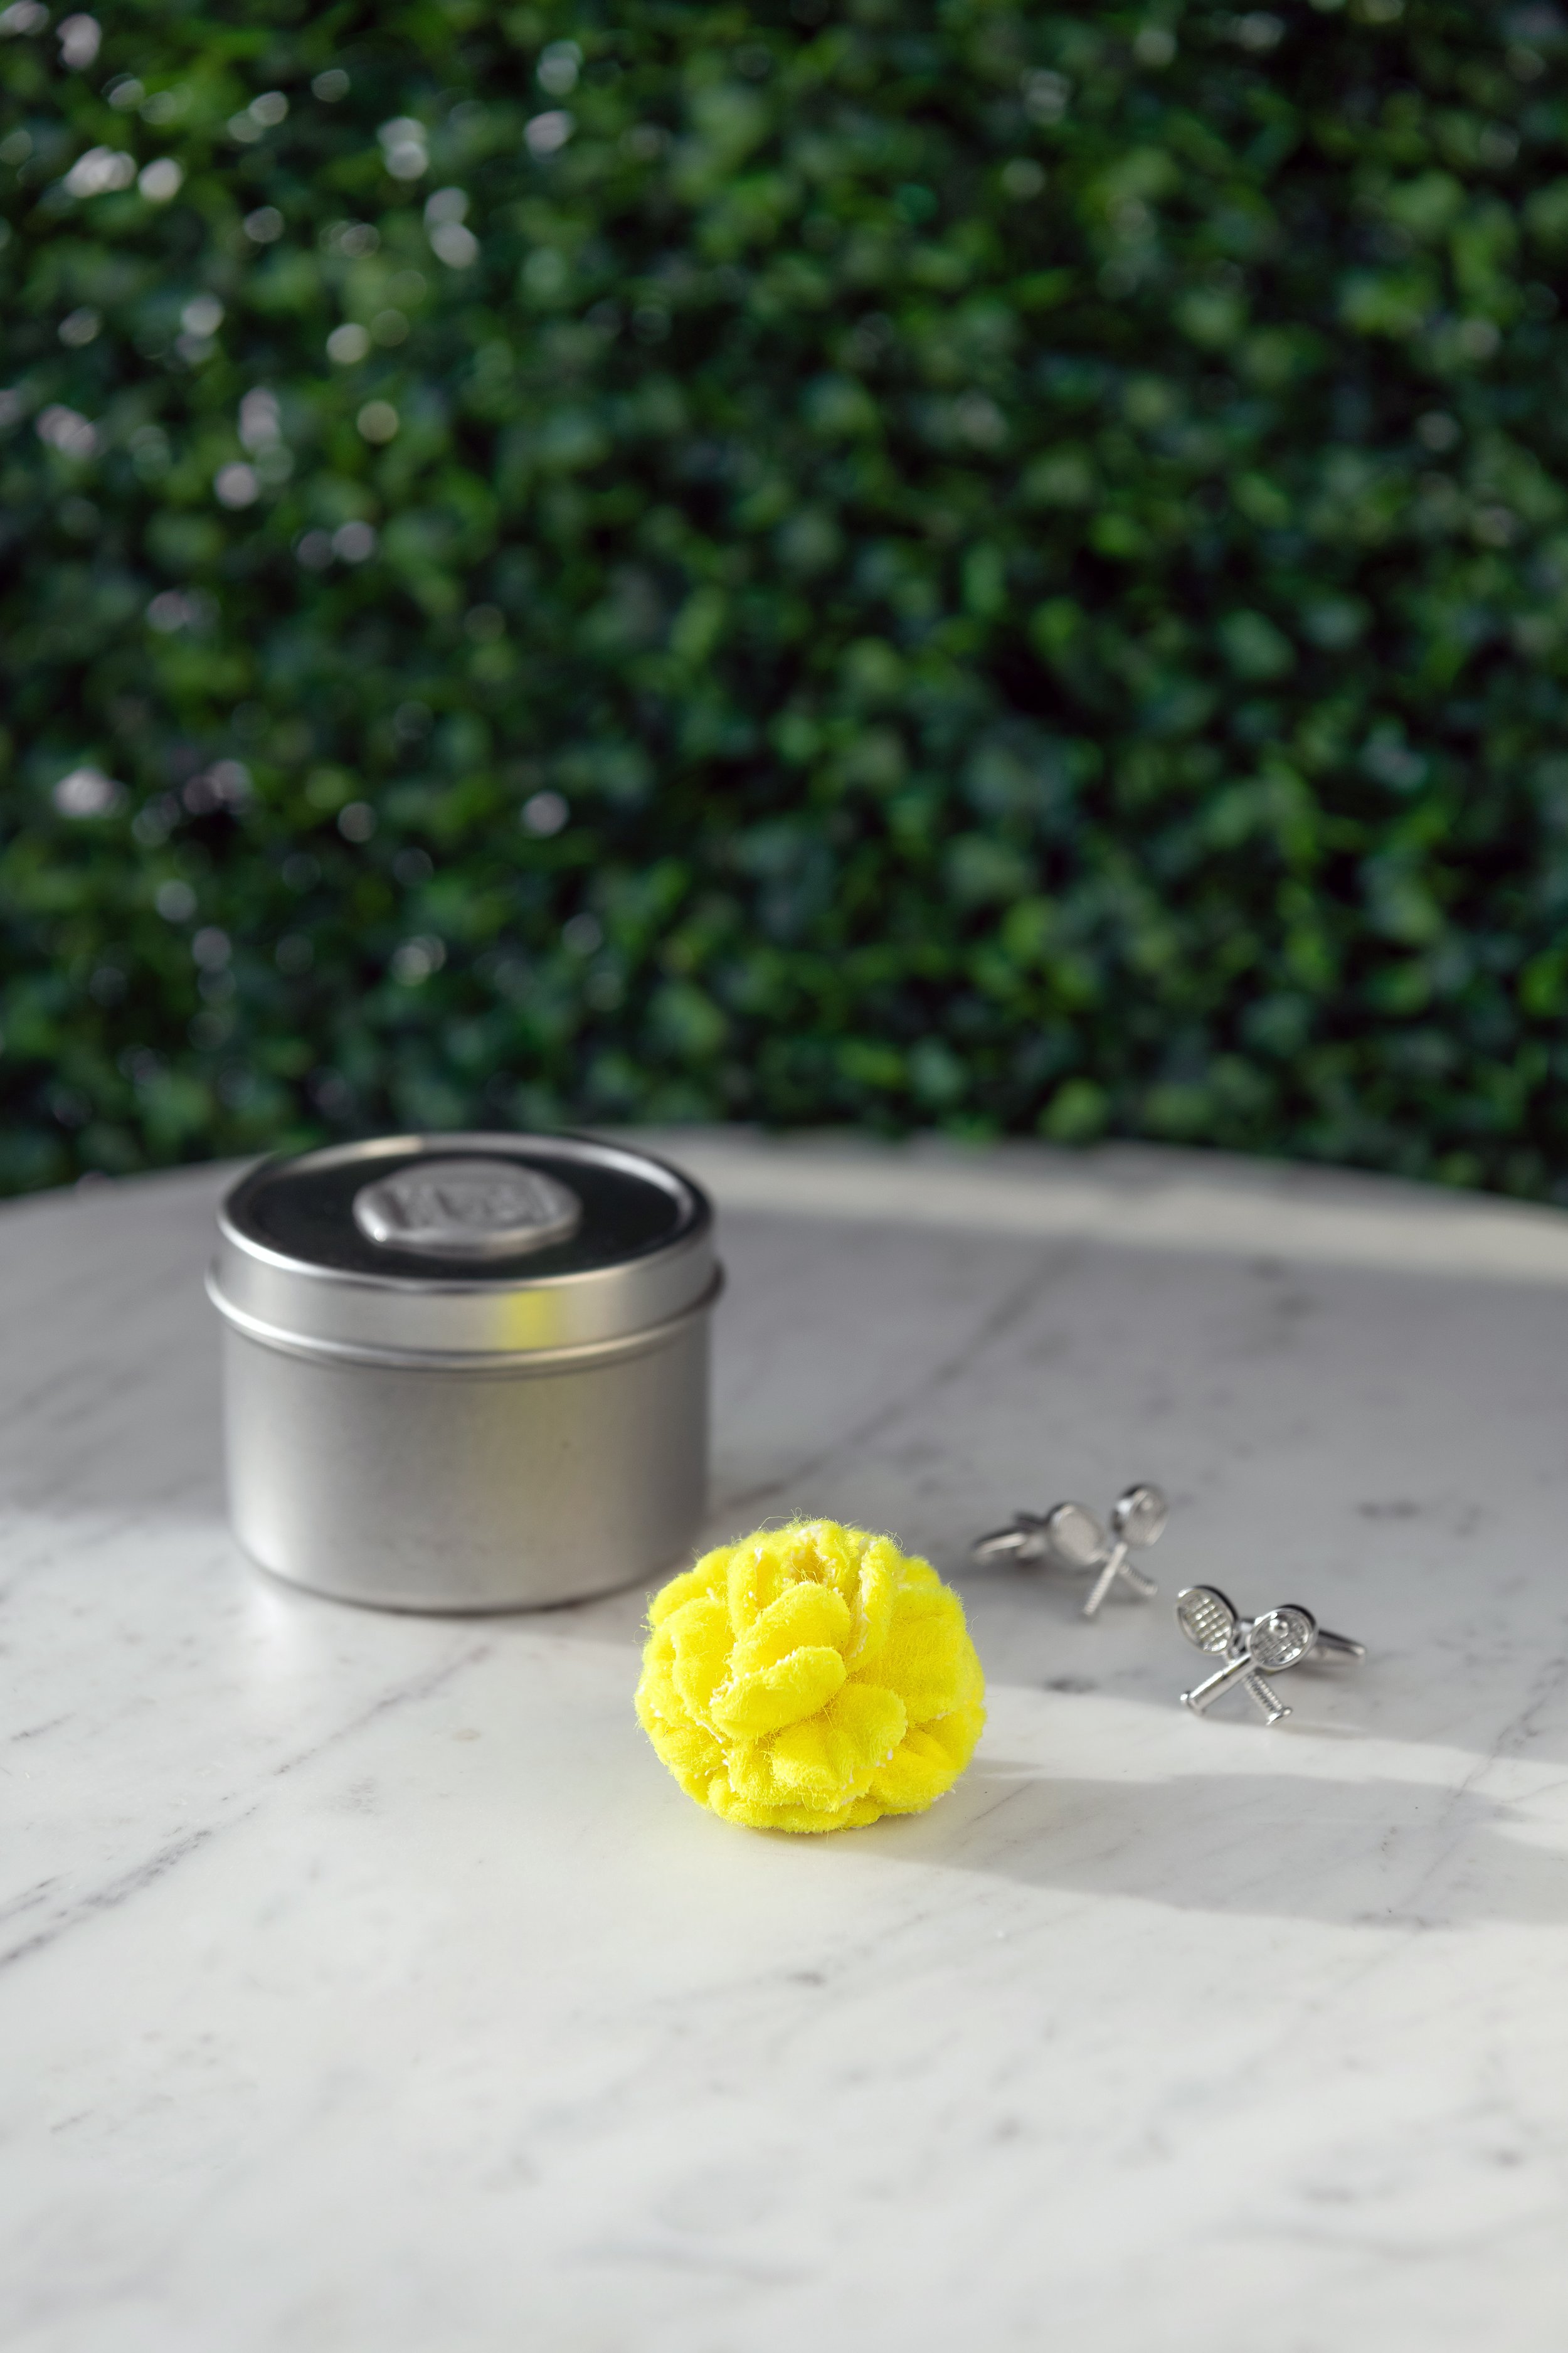 Fleur'd Pins Champion Carnation US Open Tennis Ball lapel flower courtside lifestyle - photo by Andrew Werner .jpg